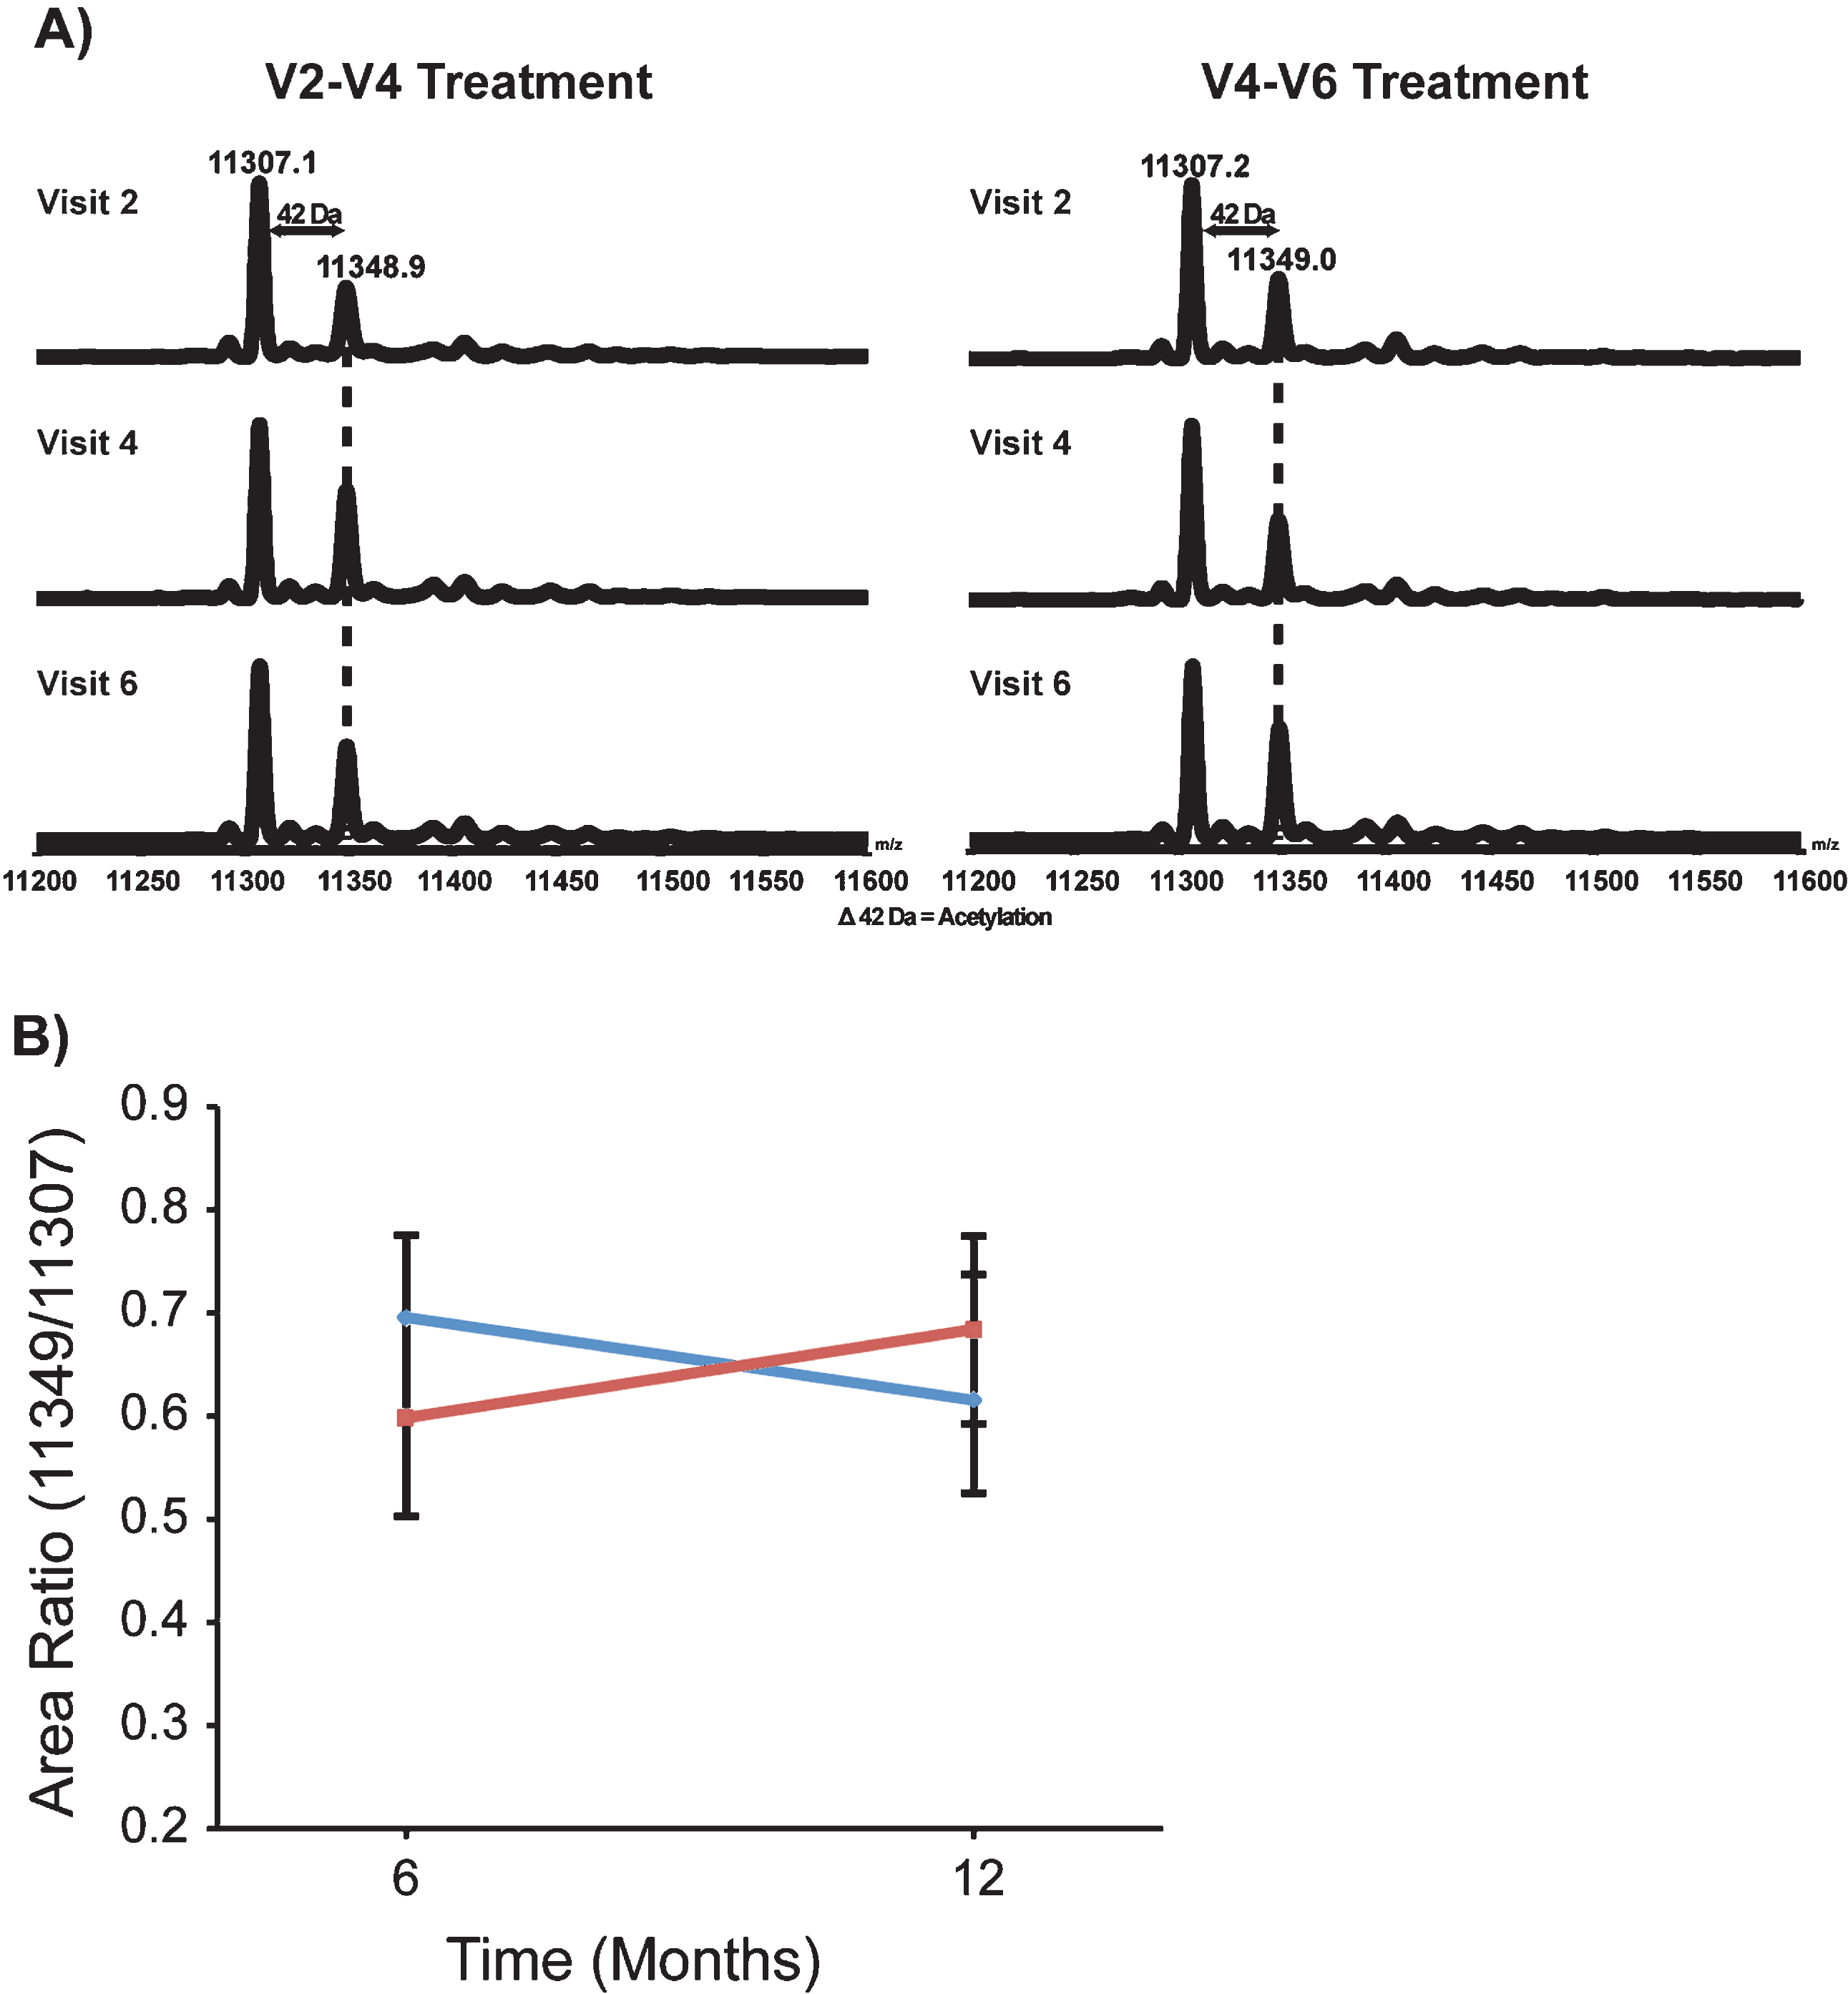 VPA increased the acetylation pattern of histone H4. Representative de-convoluted LC-MS from Group 1 (VPA/Placebo) and Group 2 (Placebo/VPA). Histone H4 was isolated from the chromatin of patient PBMCs. There were two major peaks present, 11,307.2 Da and 11,349.0 Da. These two peaks make up the majority of histone H4. Peak 11,307.2 represents the dimethylated and 11,349.0 thedimethylated/acetylated portion of histone H4. B) Quantification of the change in the histone H4 acetylation was achieved by calculating the ratio of the dimethylated/acetylated over dimethylated histone H4; this data was then averaged by group and visit. Group 1 (VPA/Placebo) had 13 patients analyzed and had group means from 0.695 (±0.080) to 0.616 (±0.121). There were 18 patients analyzed in Group 2 (Placebo/VPA)with a group mean from 0.599 (±0.096) to 0.683 (±0.090).